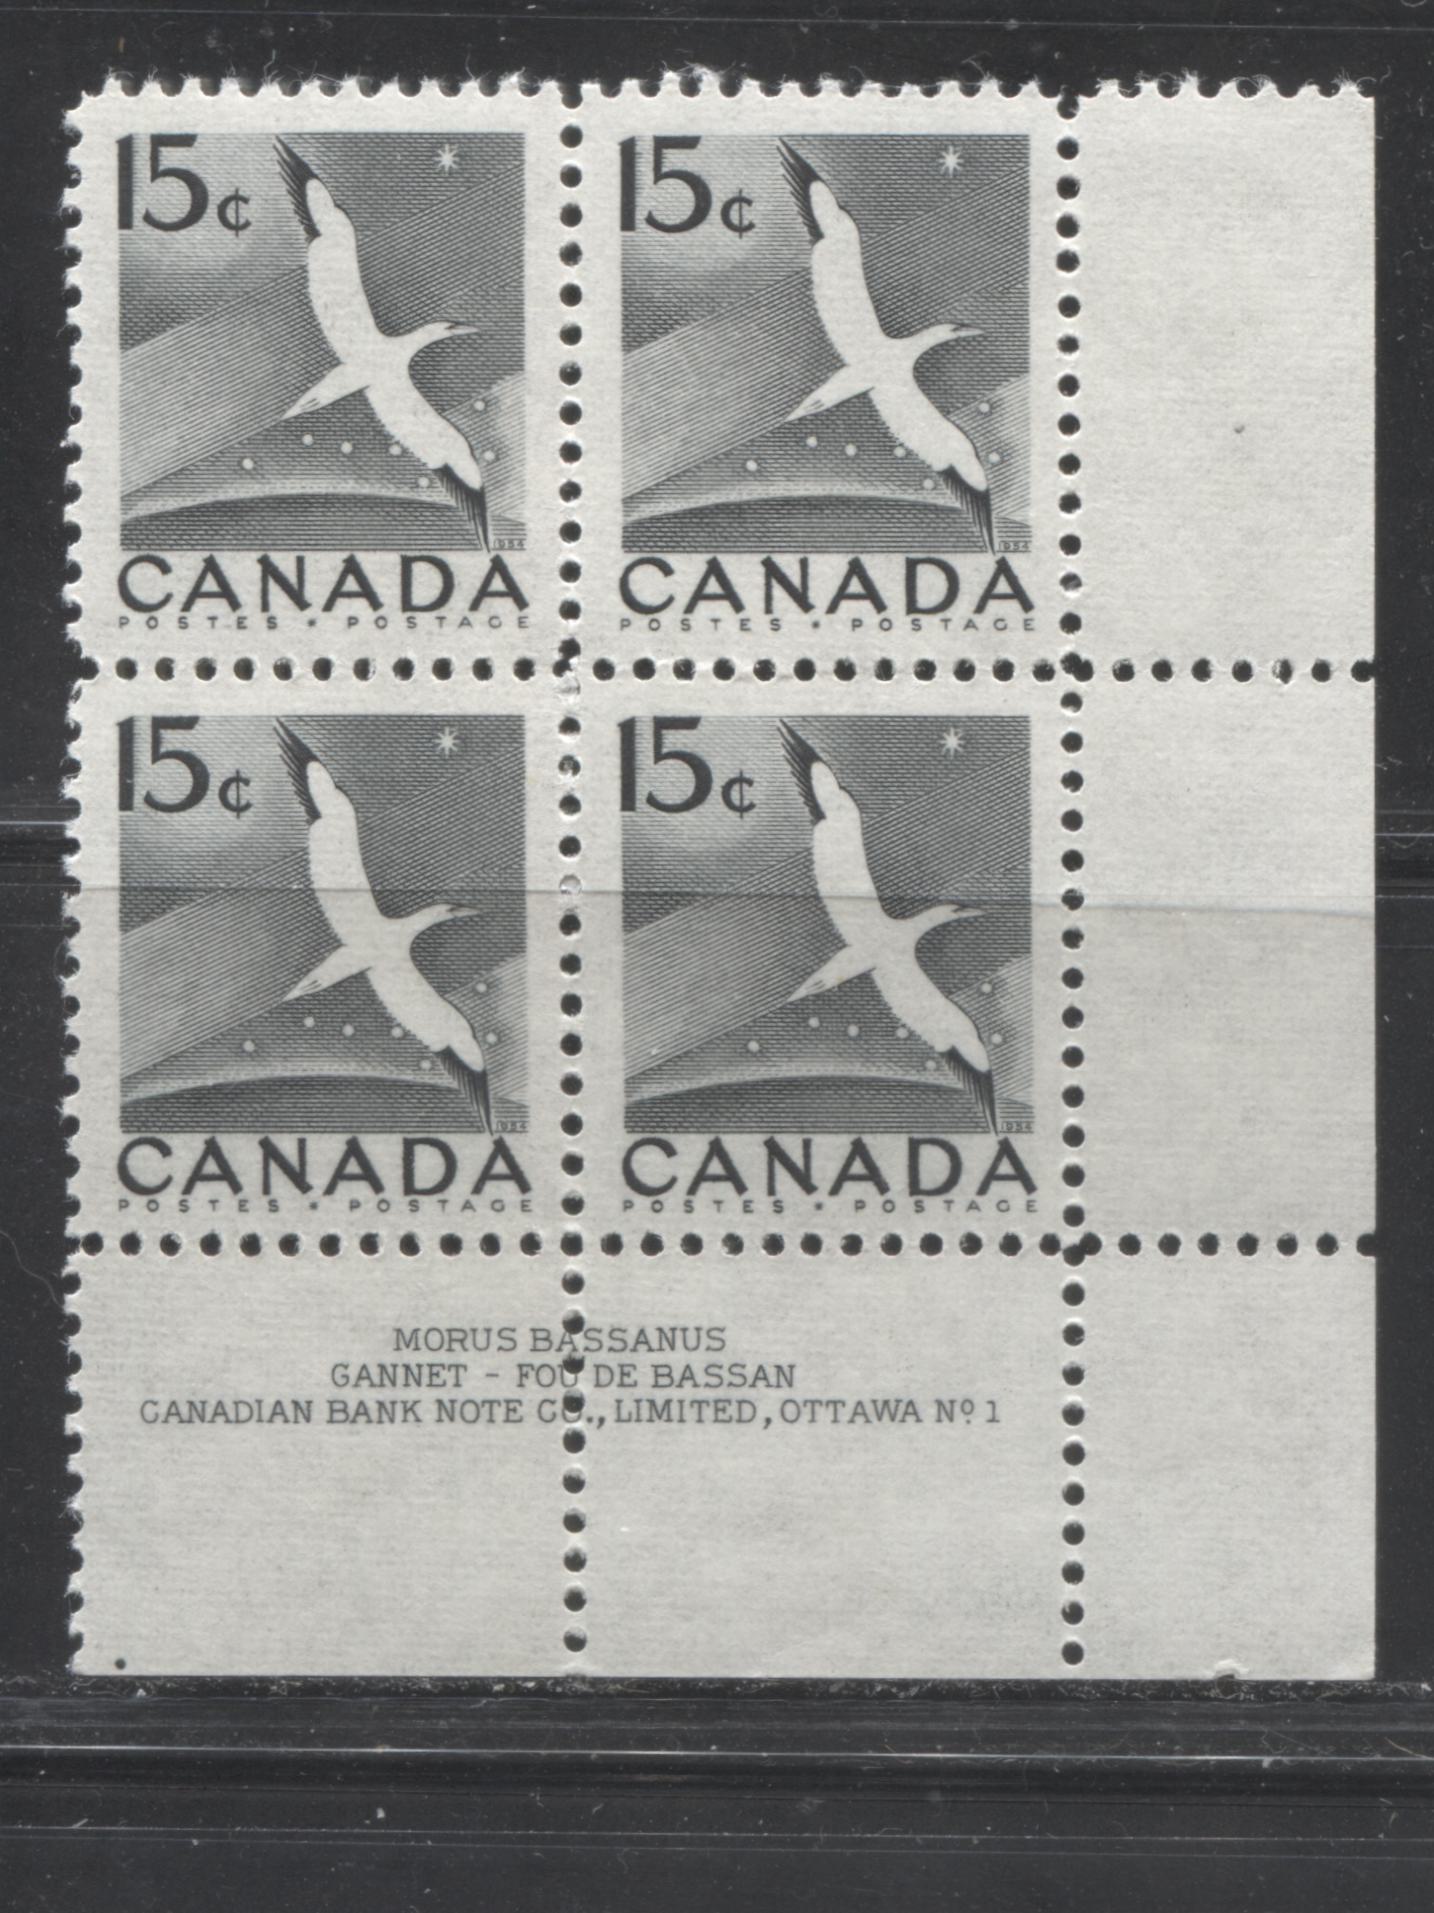 Canada #343 15c Black Gannet, 1954-1962 Wilding Issue, Lower Right Plate 1 Block of 4. Perf. 11.85x11.95 Dull Fluorescent Ribbed Paper with Smooth Back VFNH